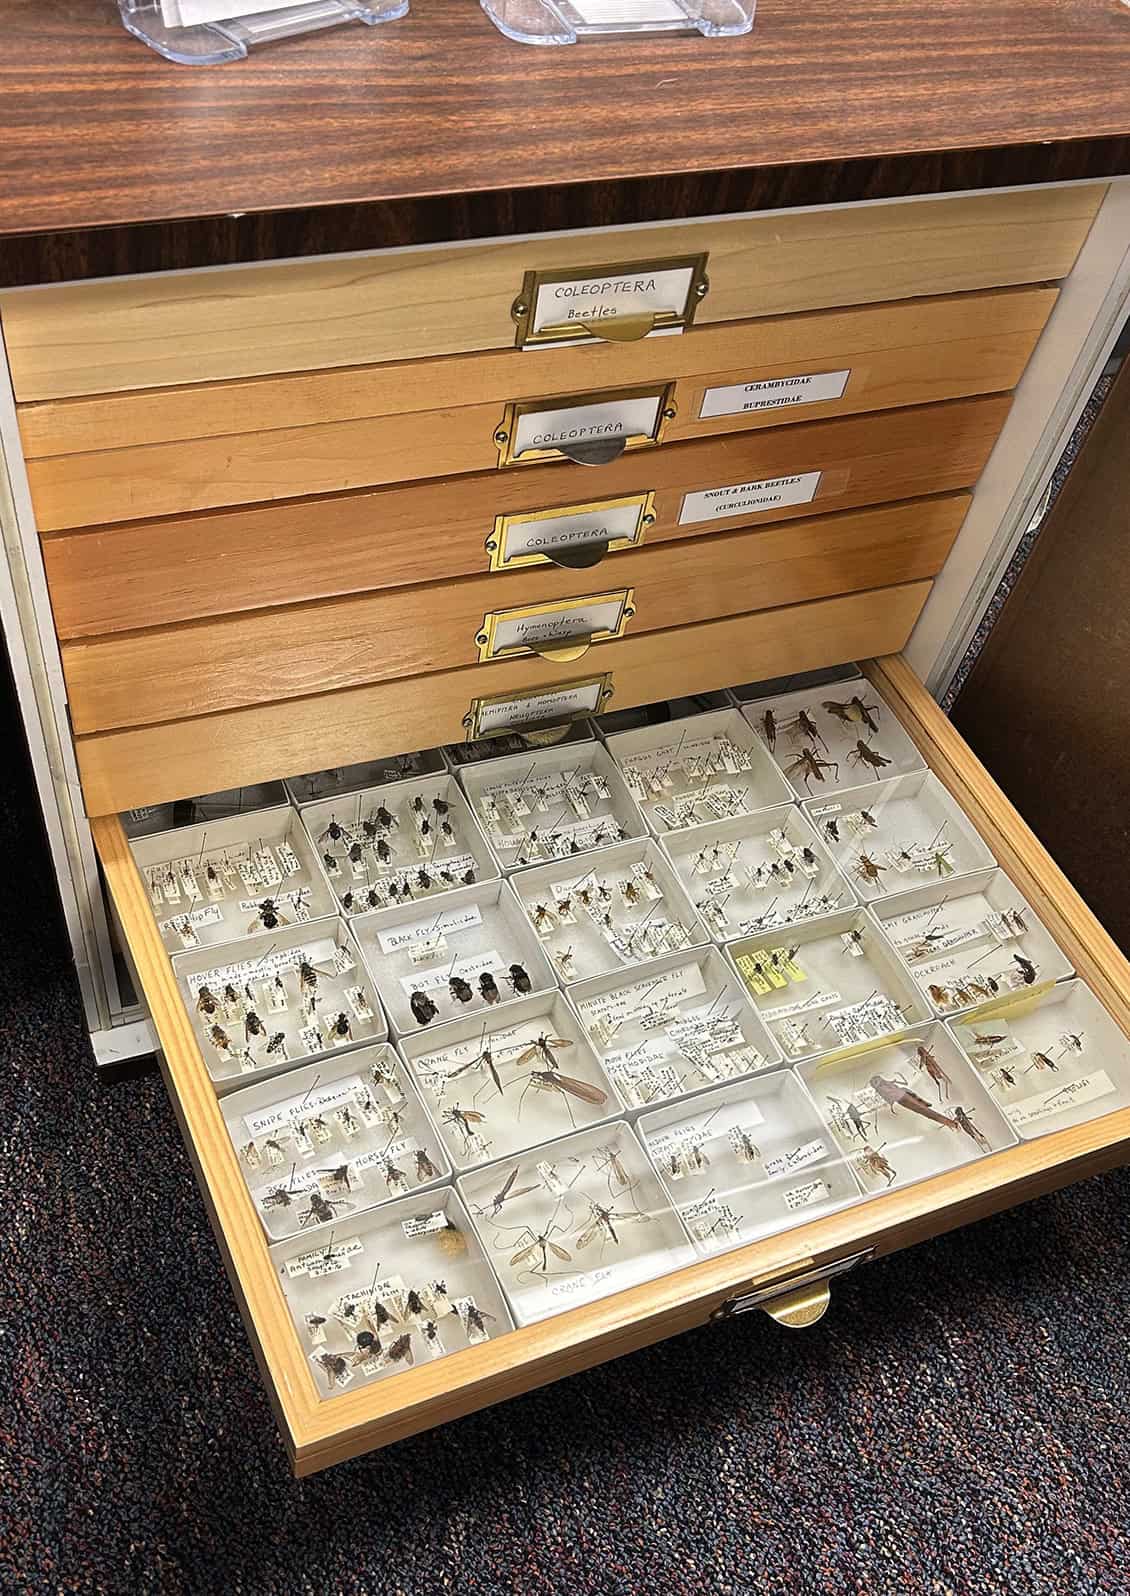 The plant clinic in Burlington is home to Dr. Lloyd Eighme's (1927 – 2021) extensive insect collection which can be viewed during clinic hours. https://www.skagitmg.org/home/publications/insects/  © Skagit County WSU Extension Master Gardeners